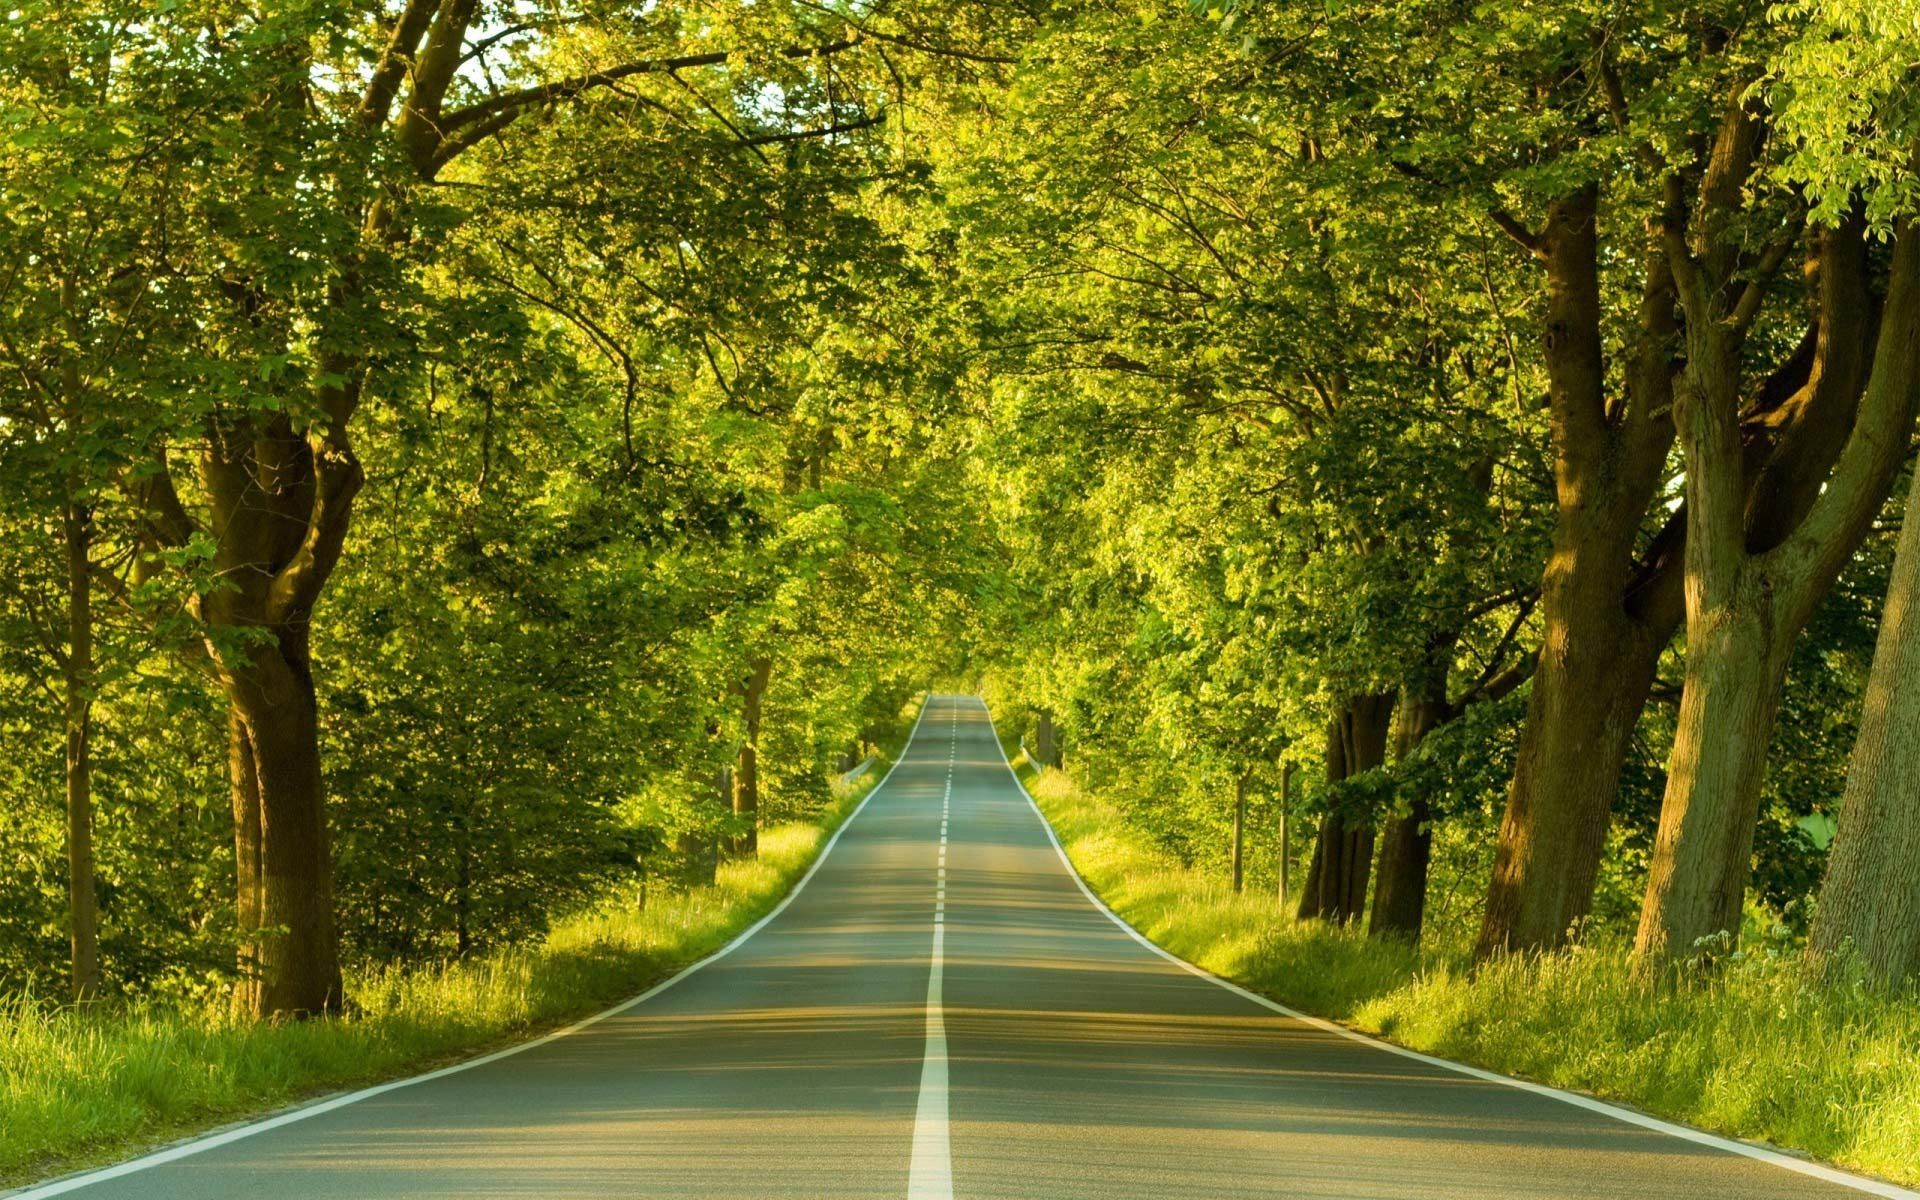 roads with trees. Road through trees wallpaper. Landscape